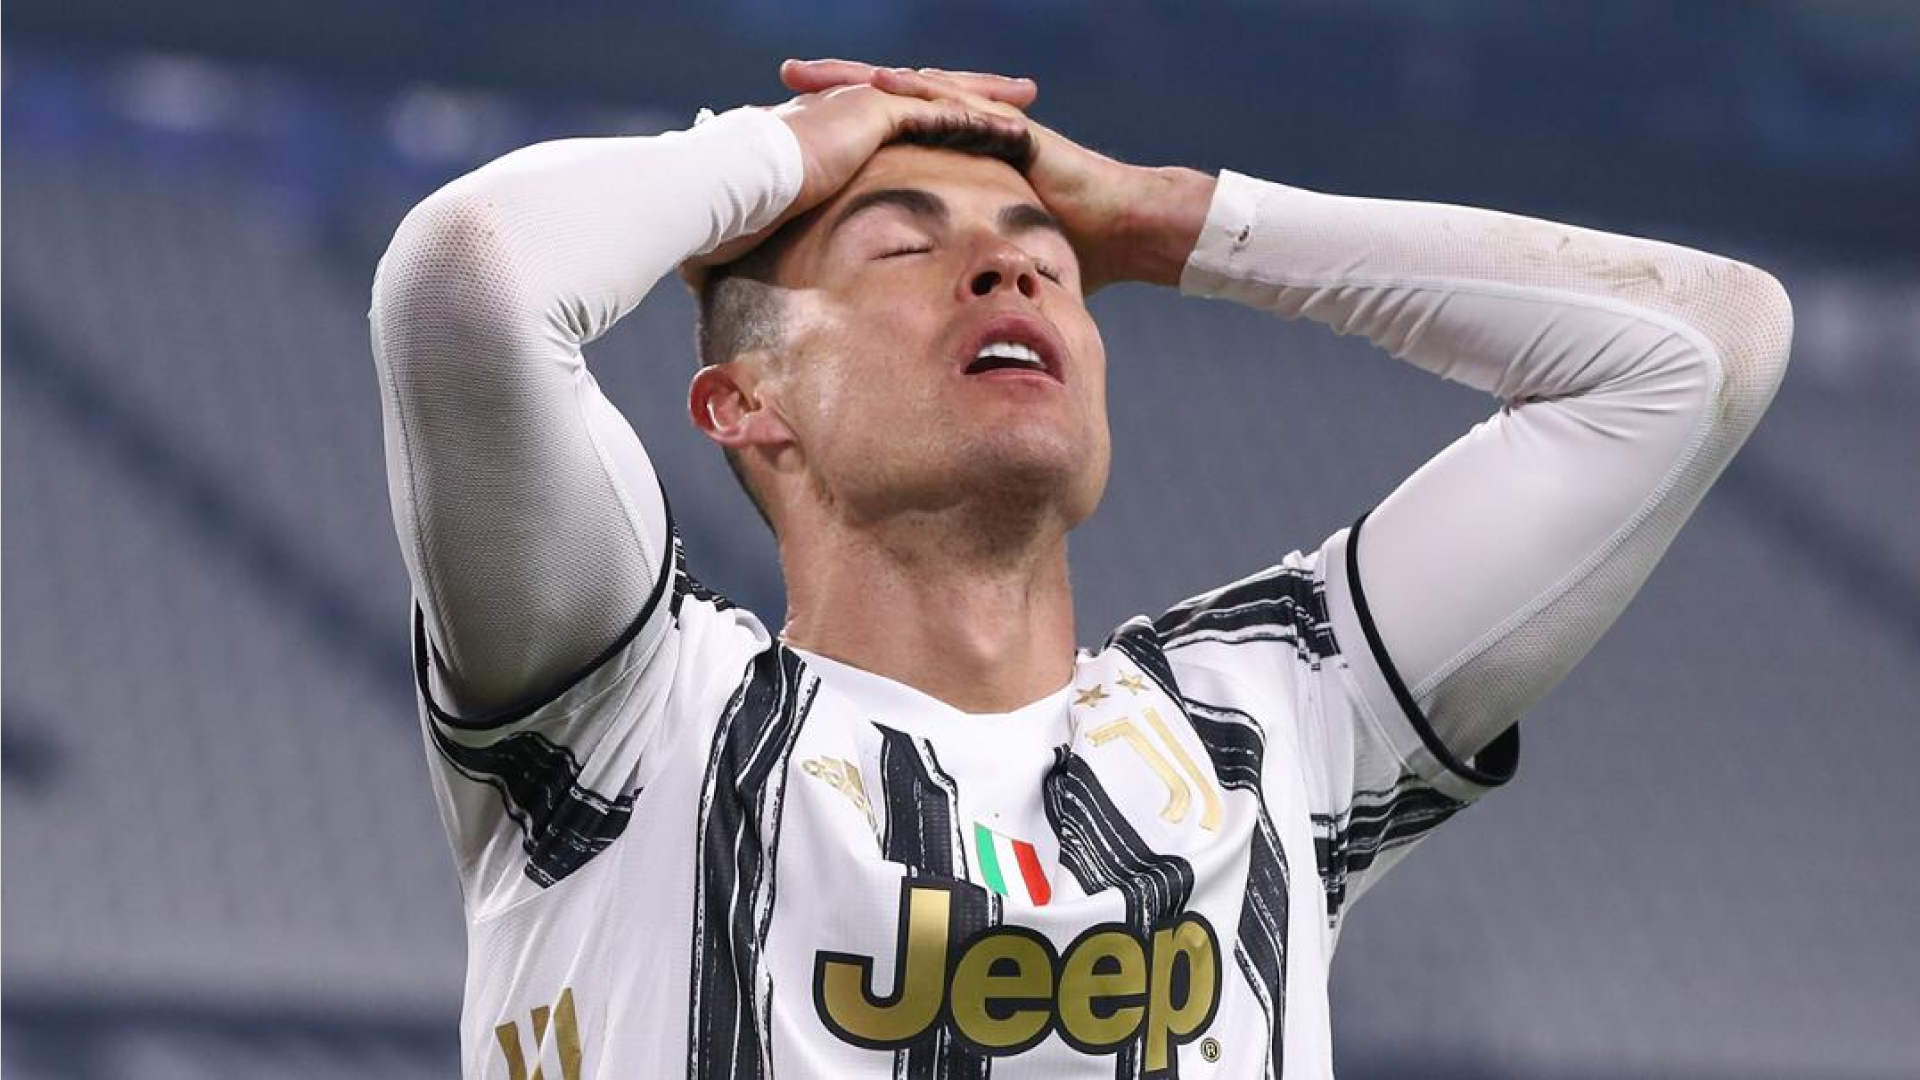 Ronaldo was Fined £50,000 and Banned for Two Games